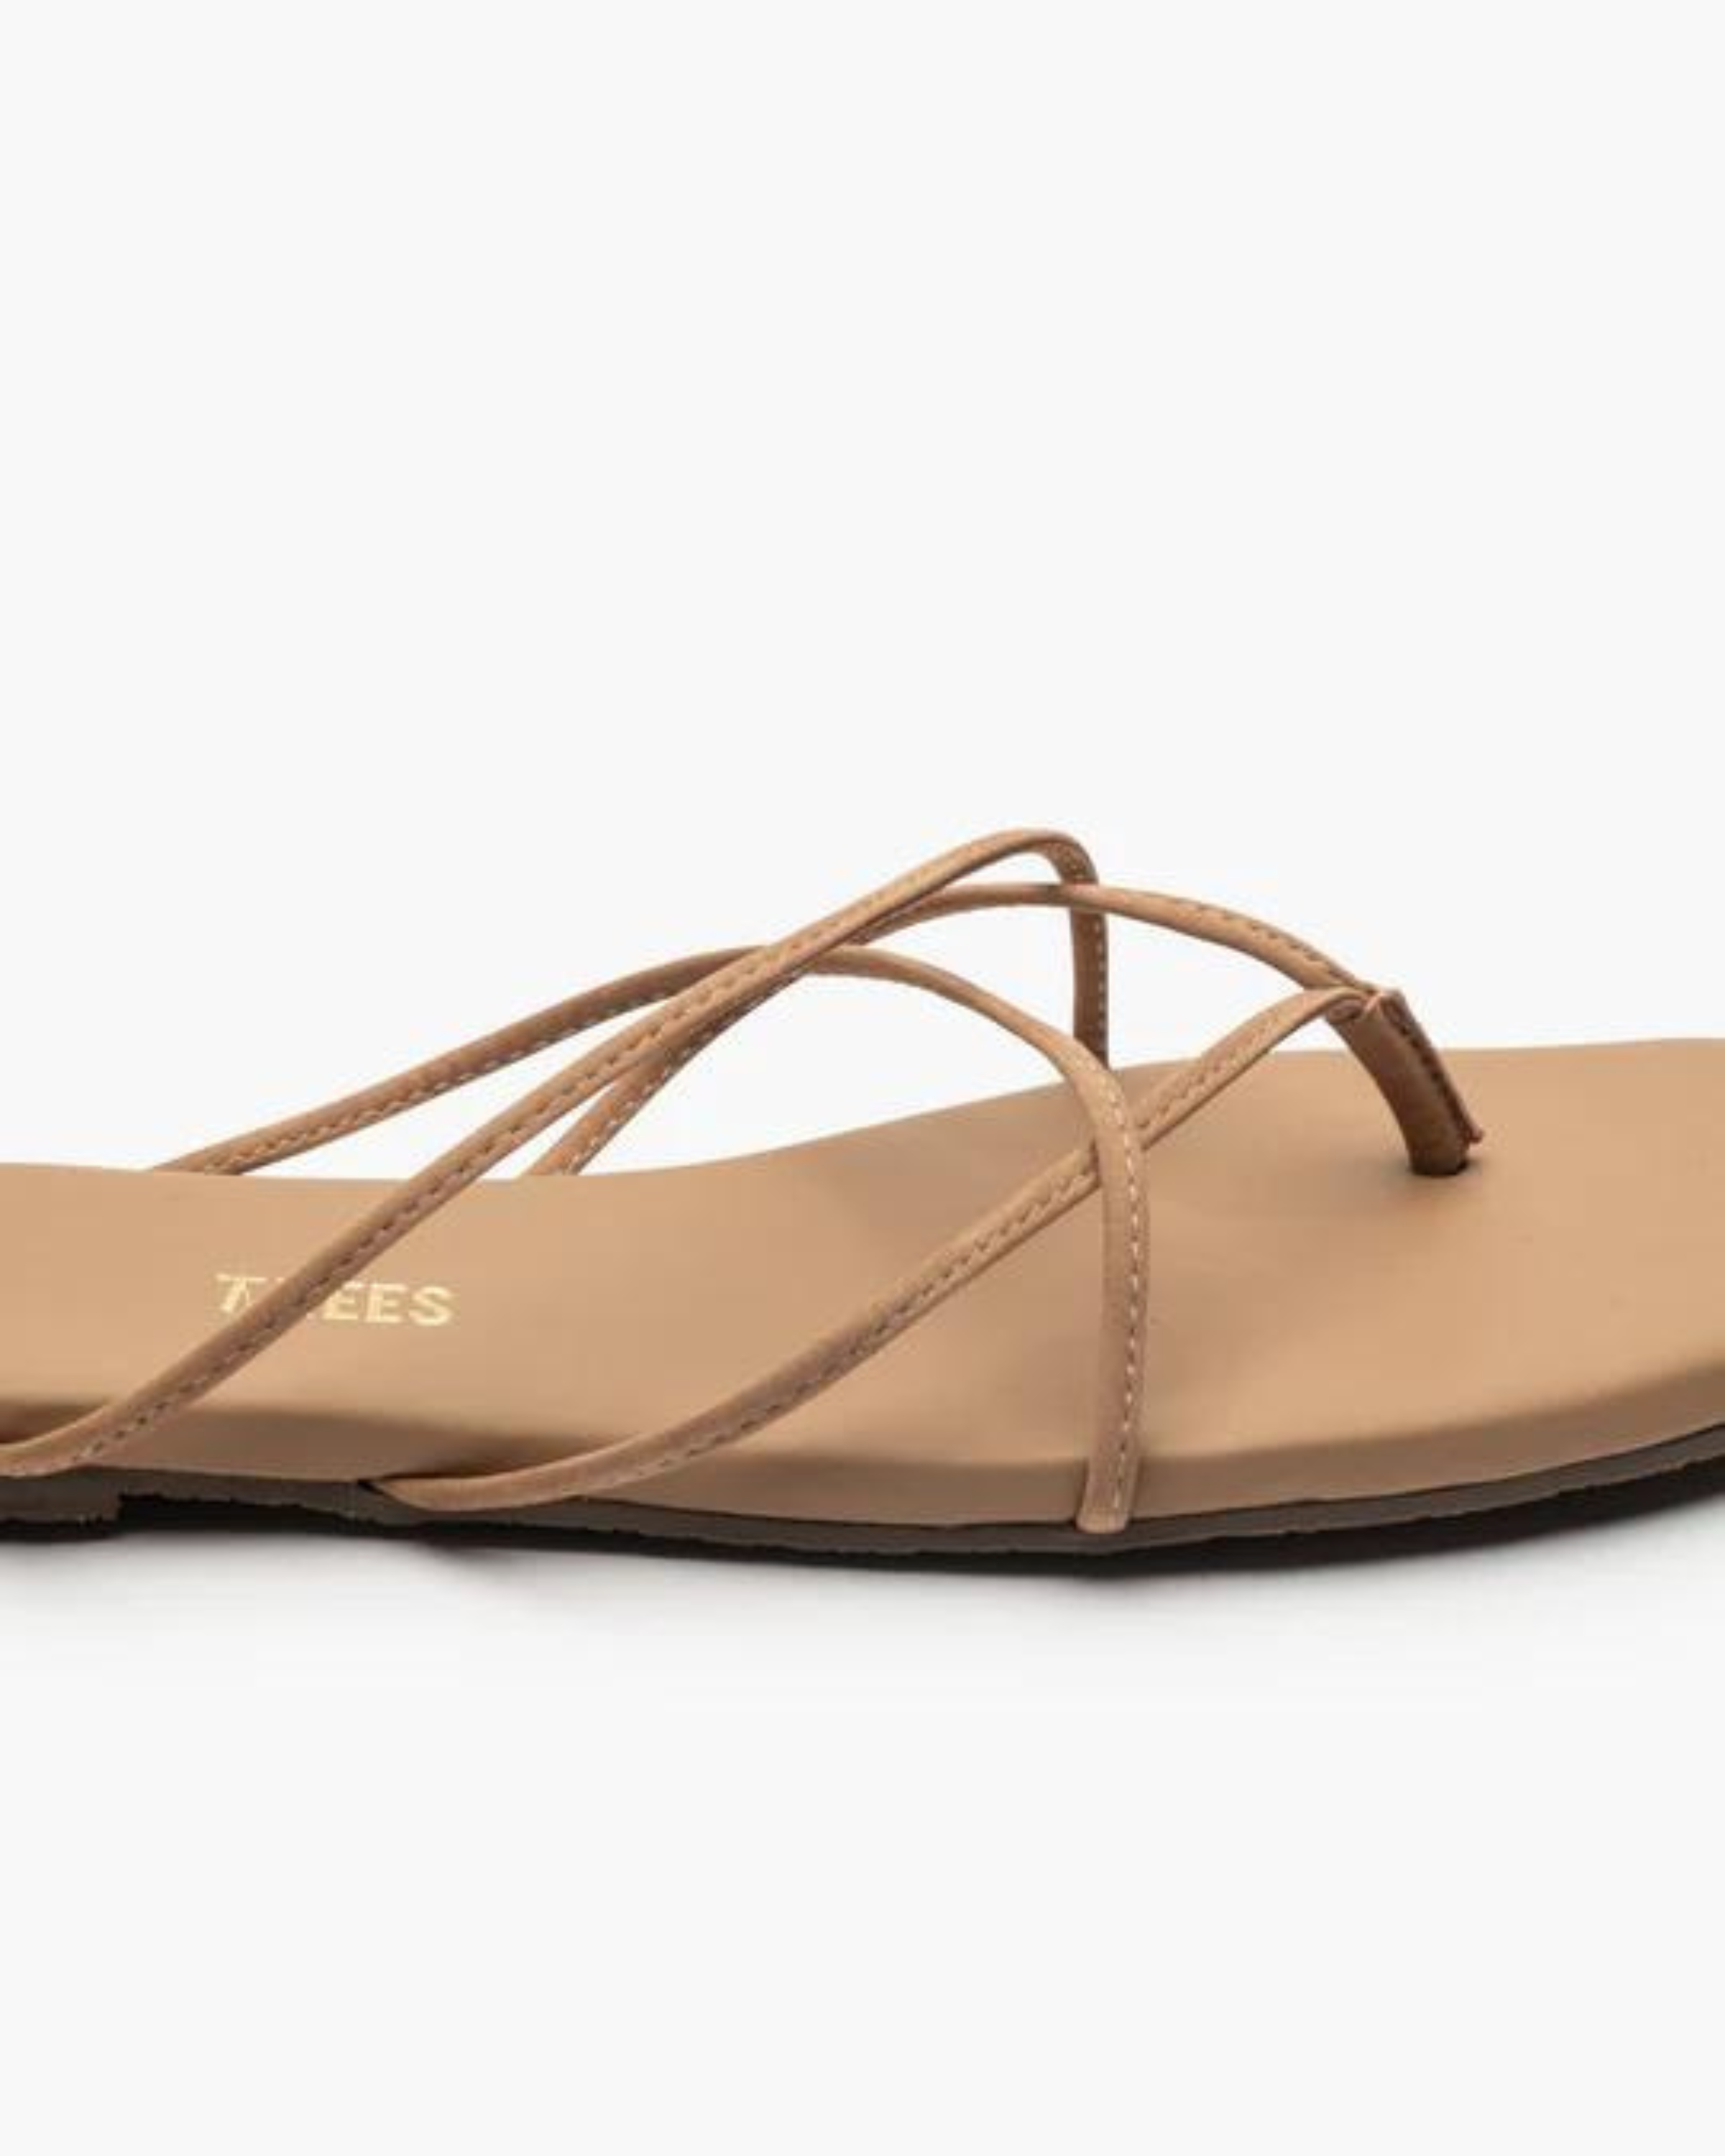 TKEES Square Toe Elle Sandal in Cocobutter